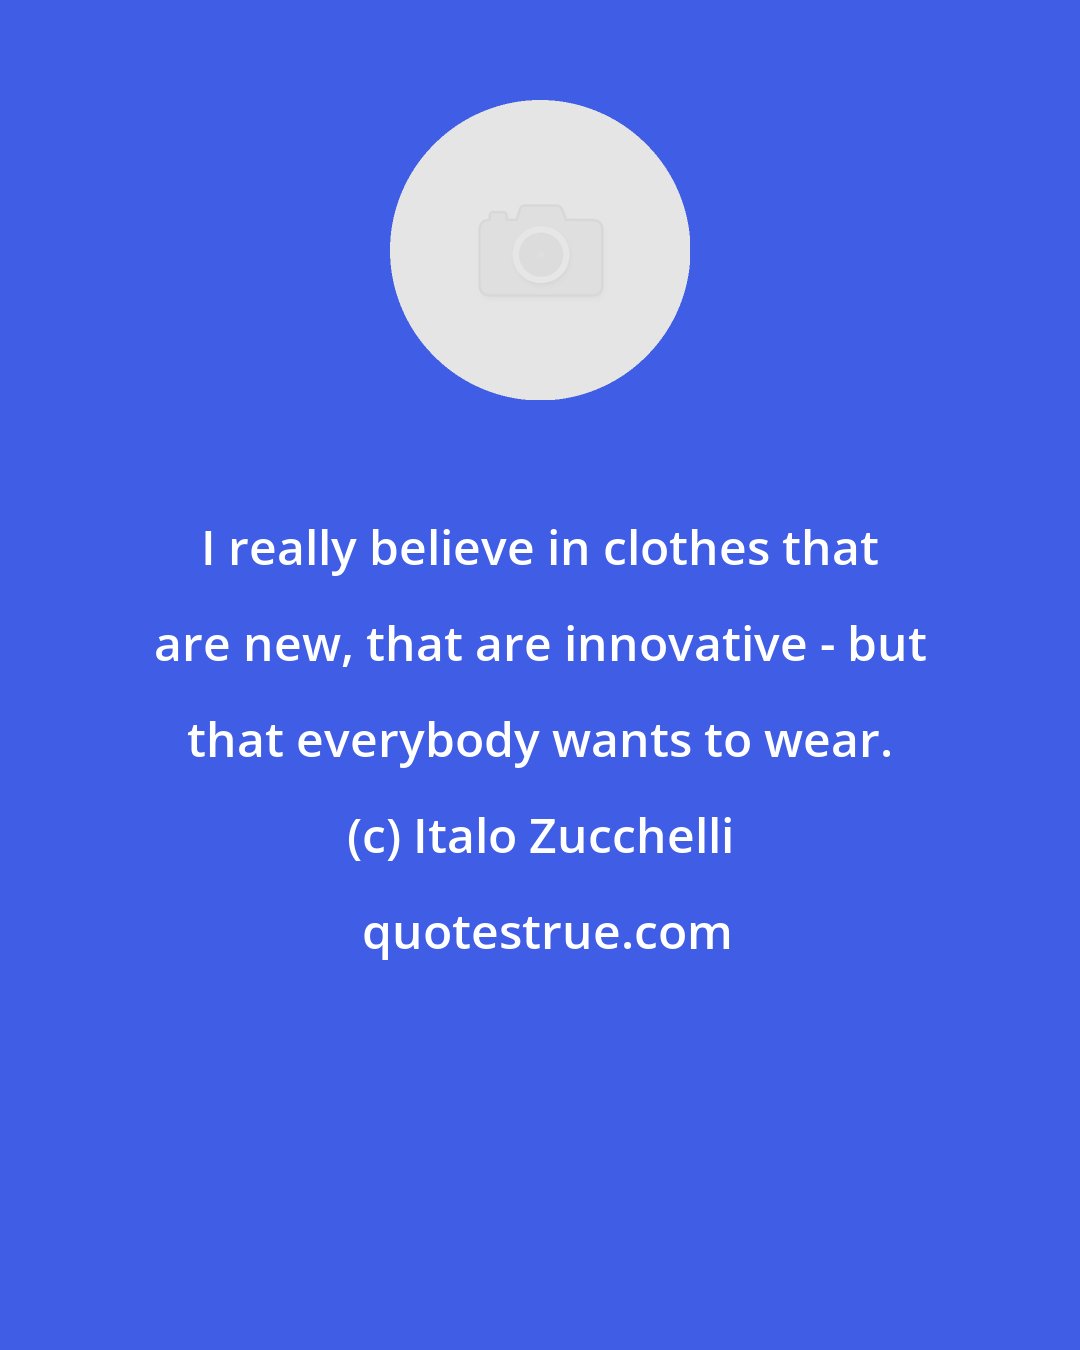 Italo Zucchelli: I really believe in clothes that are new, that are innovative - but that everybody wants to wear.